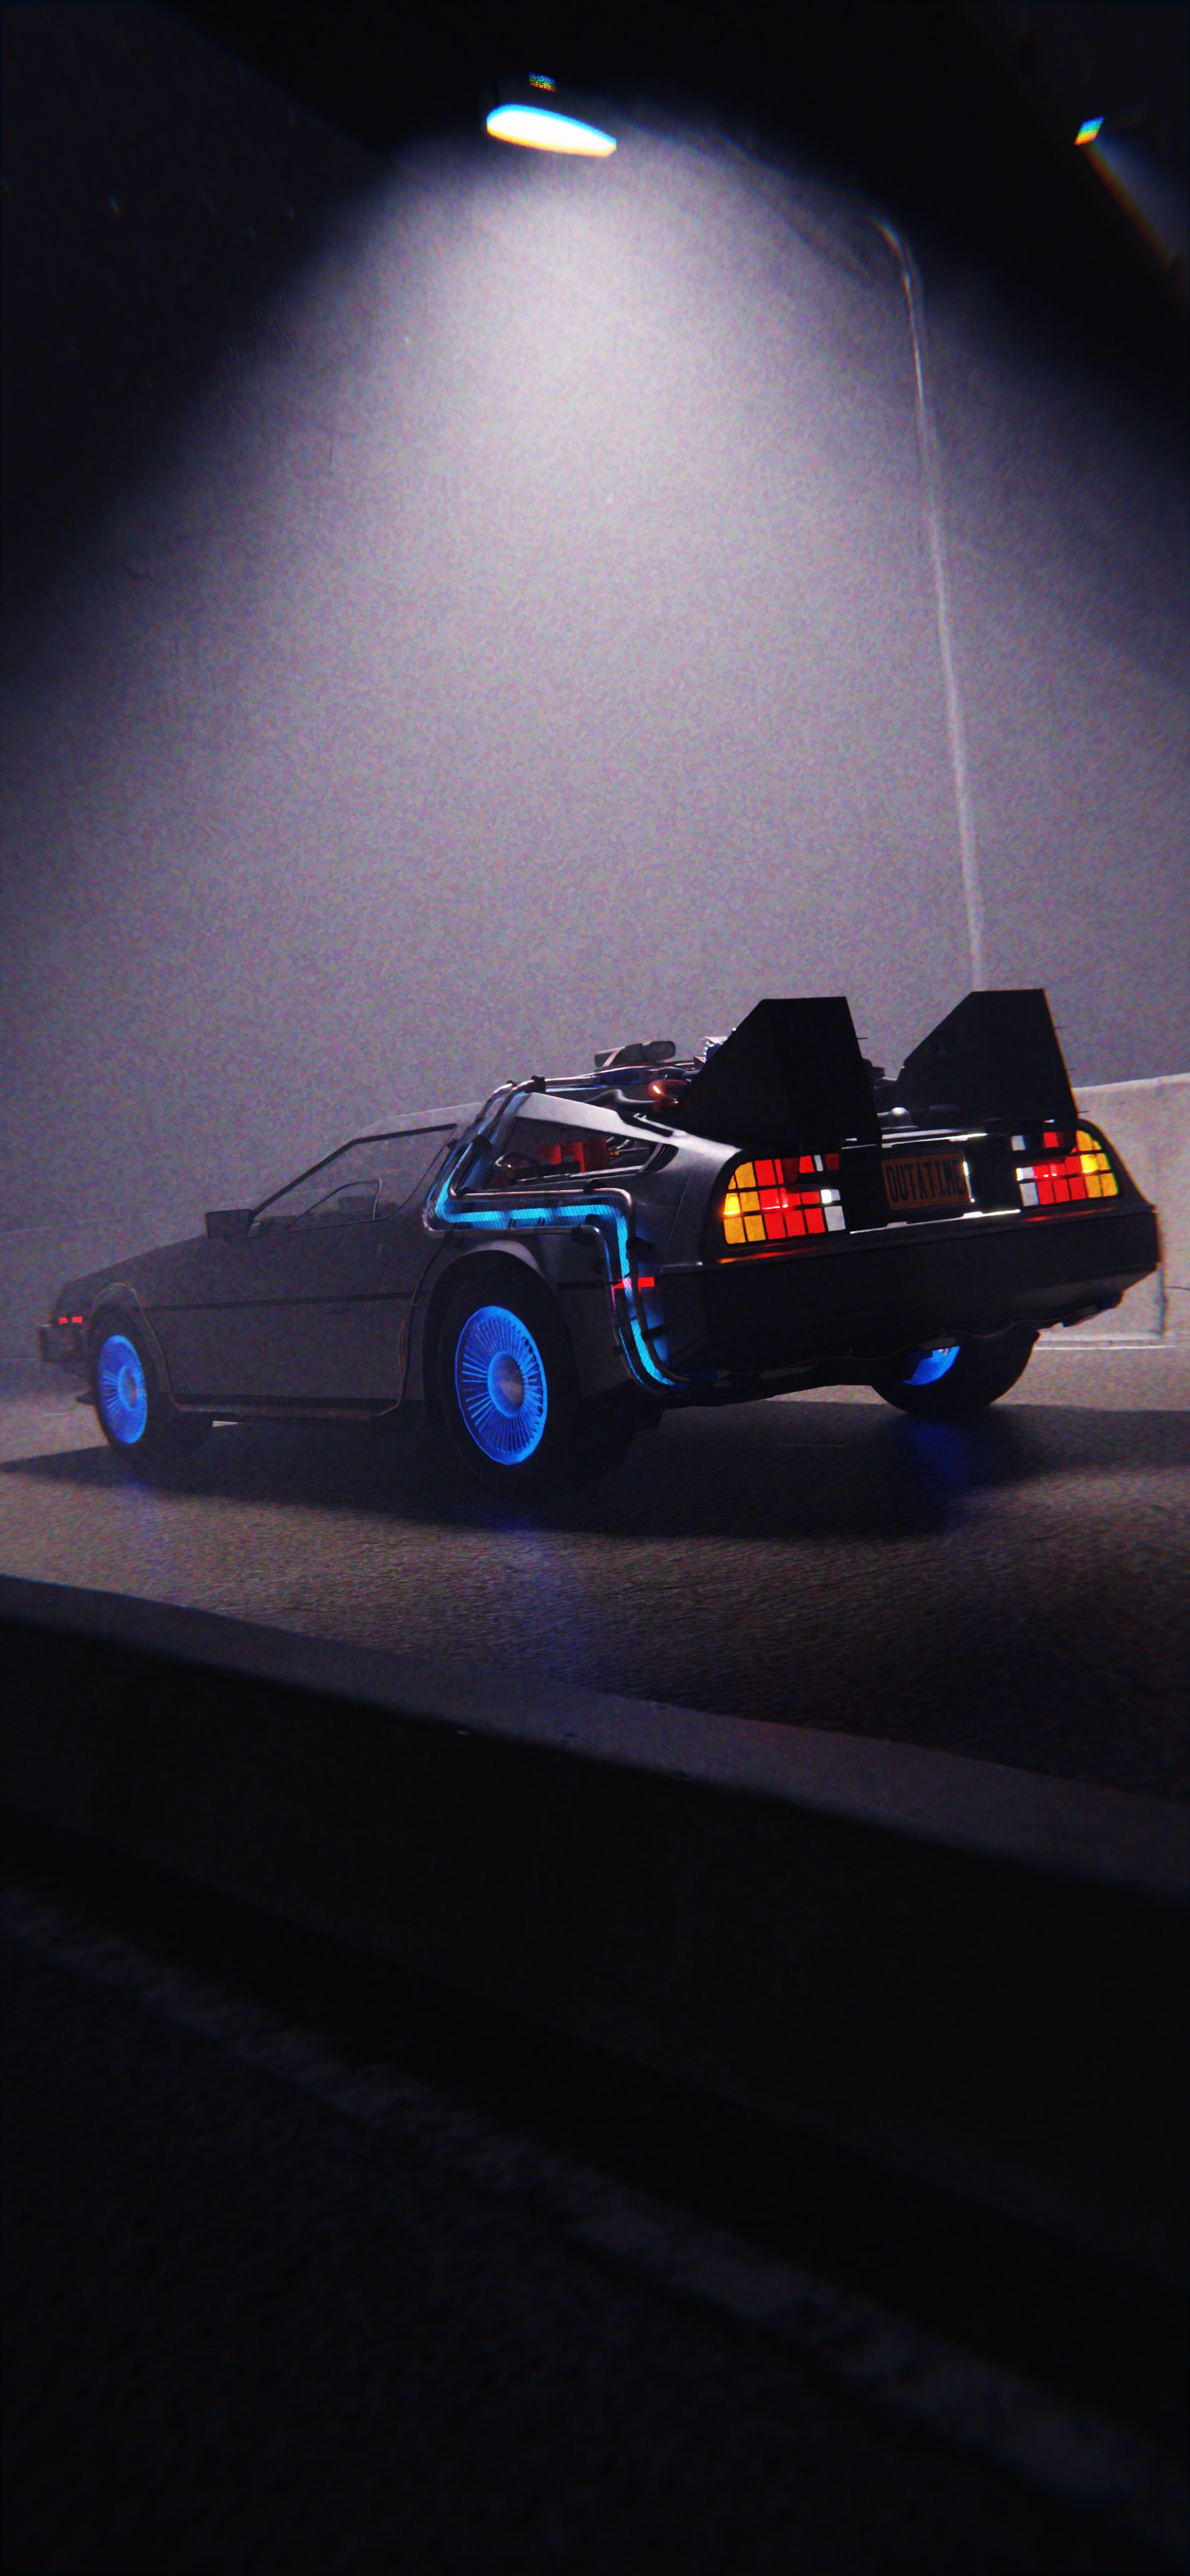 <a href='https://sketchfab.com/3d-models/delorean-back-to-the-future-7bae1ee2b70044ed973b27a828cf0f54' target='_blank' style='color: #FF9900;'>Delorean<a> in some cool lighting scene